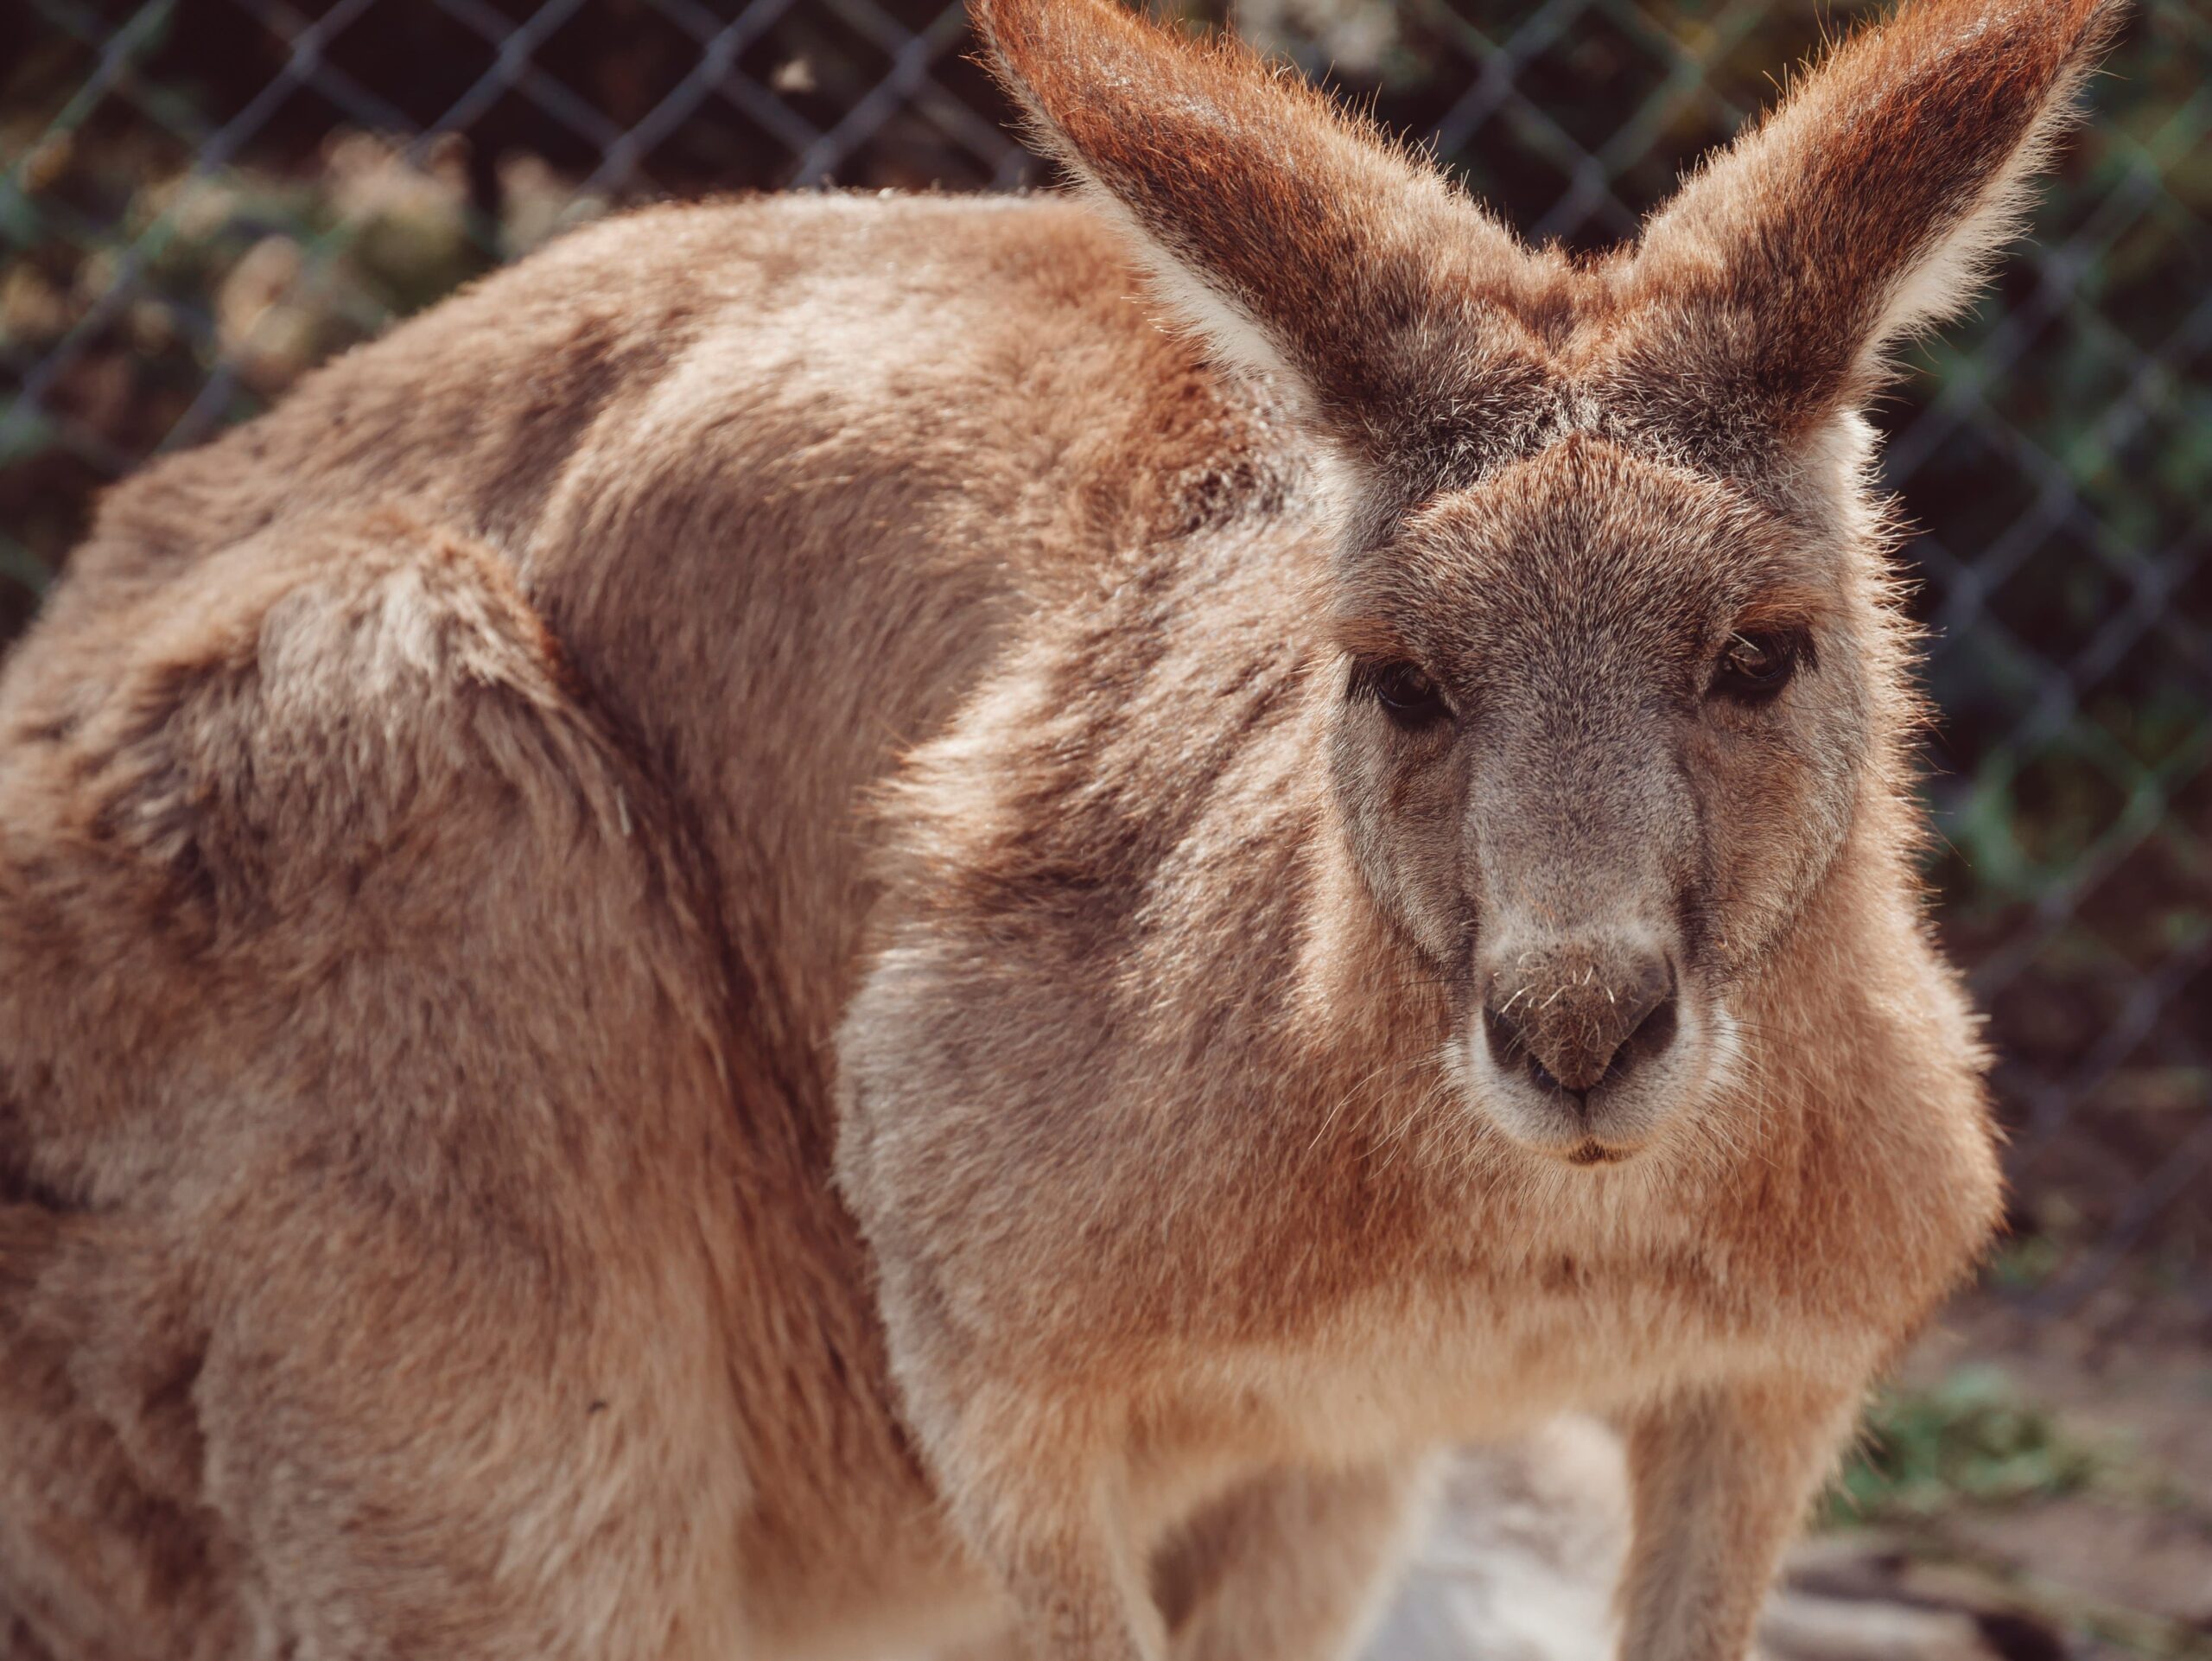 Why Are There So Many Marsupials In Australia